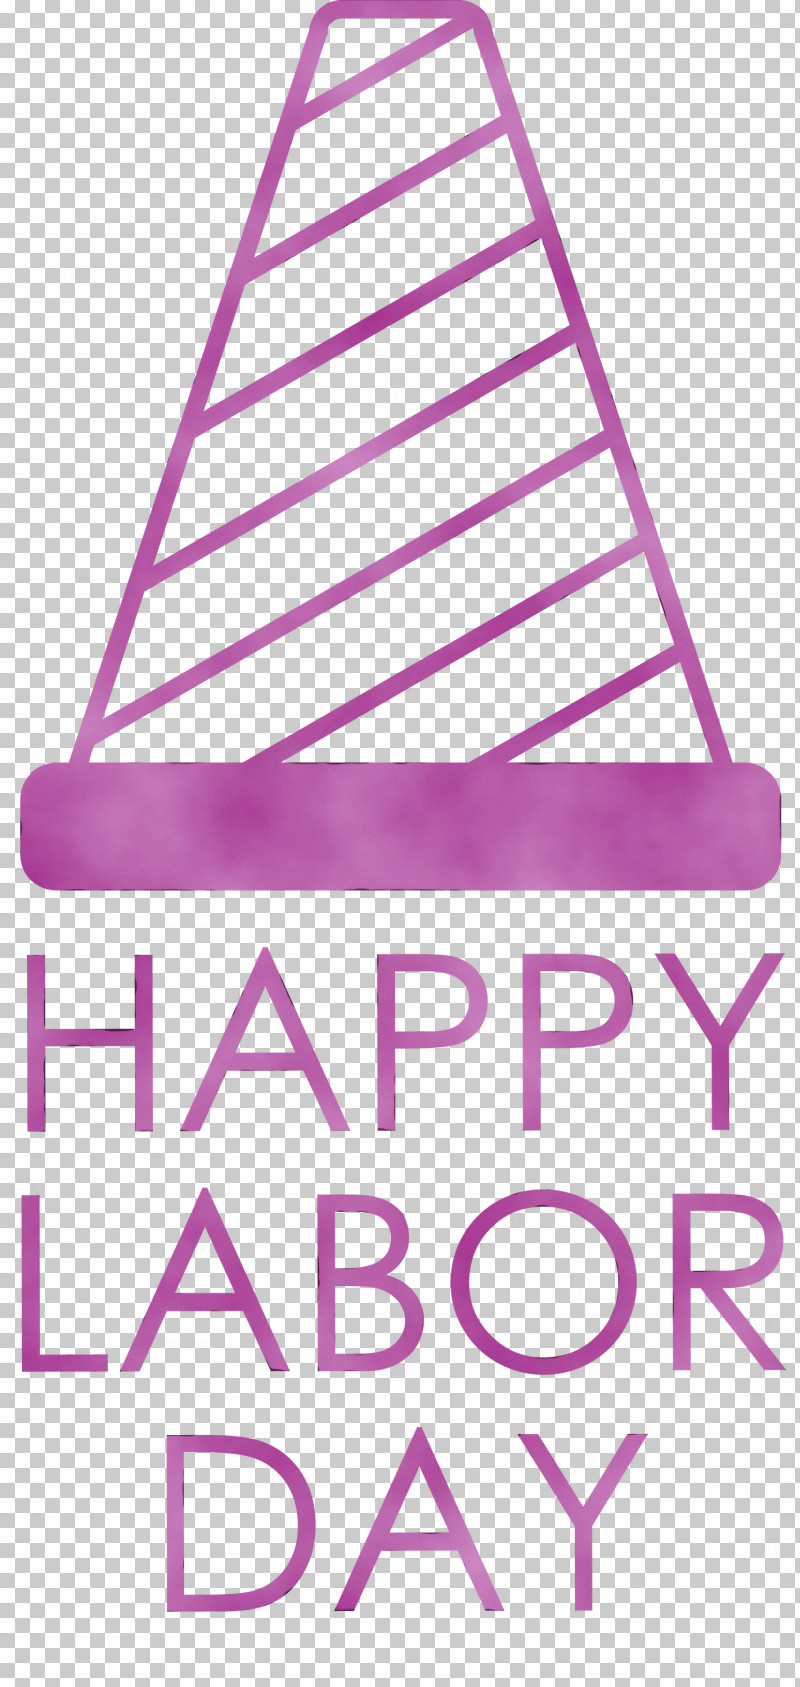 Line Triangle Meter Shoe Banner PNG, Clipart, Banner, Geometry, Labor Day, Labour Day, Line Free PNG Download